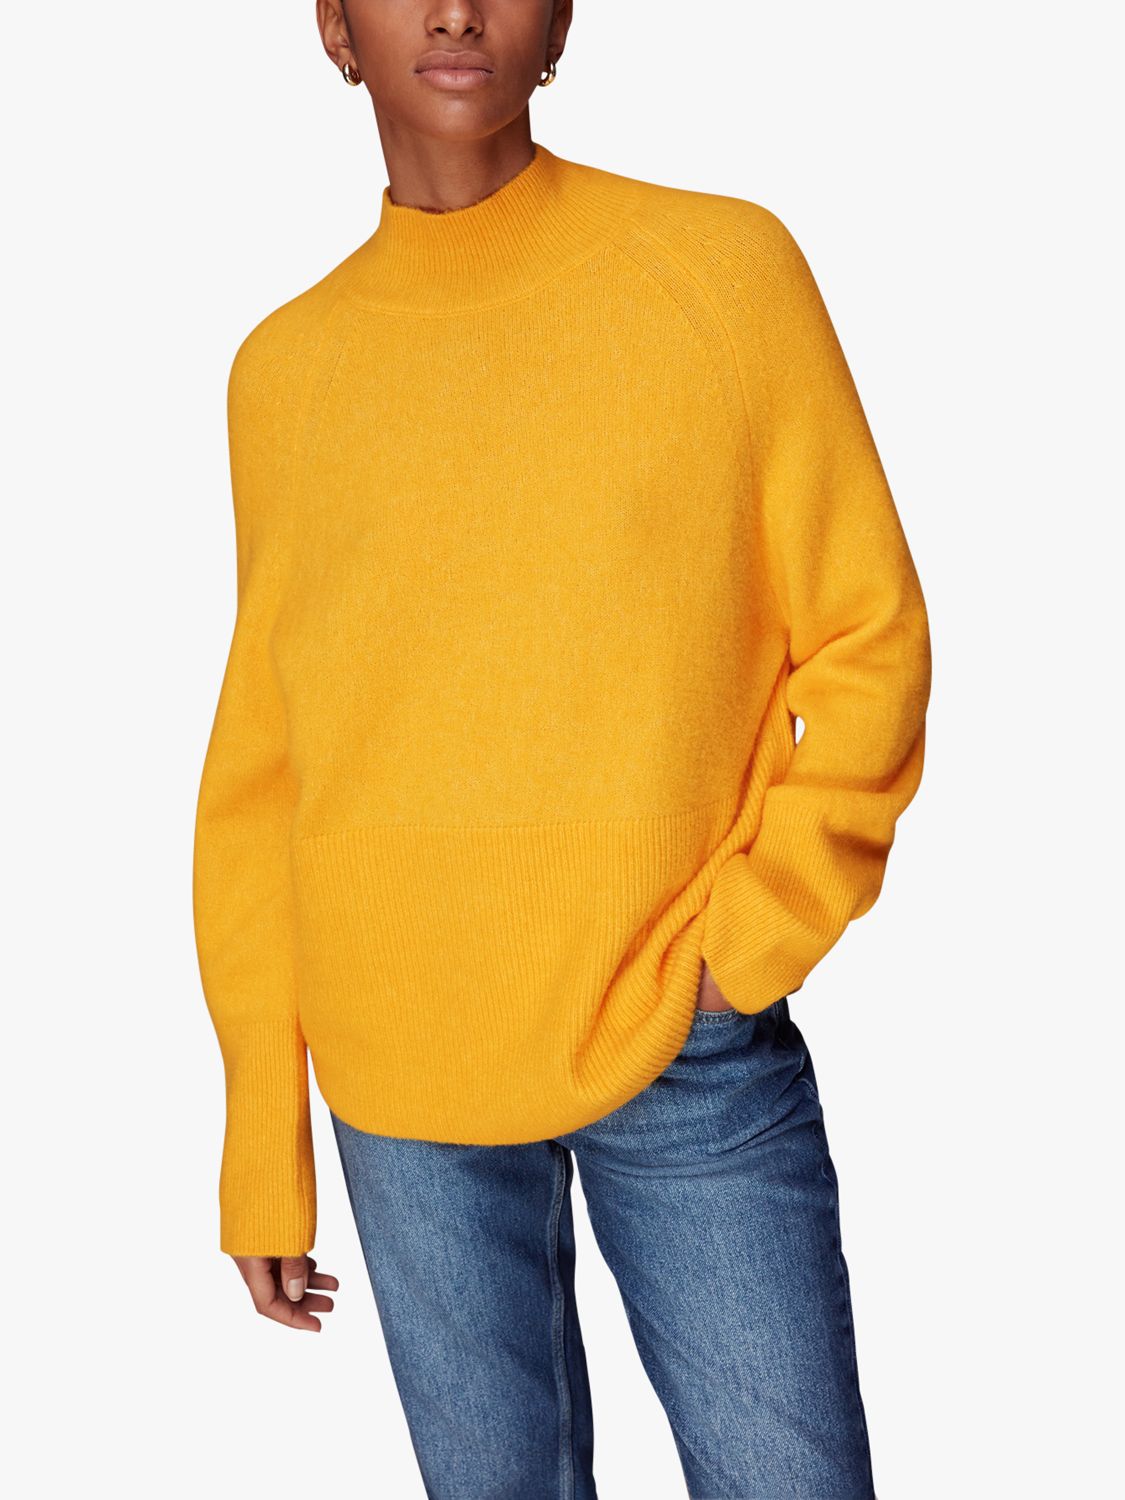 Whistles Oversize Funnel Neck Wool Blend Jumper, Yellow, S